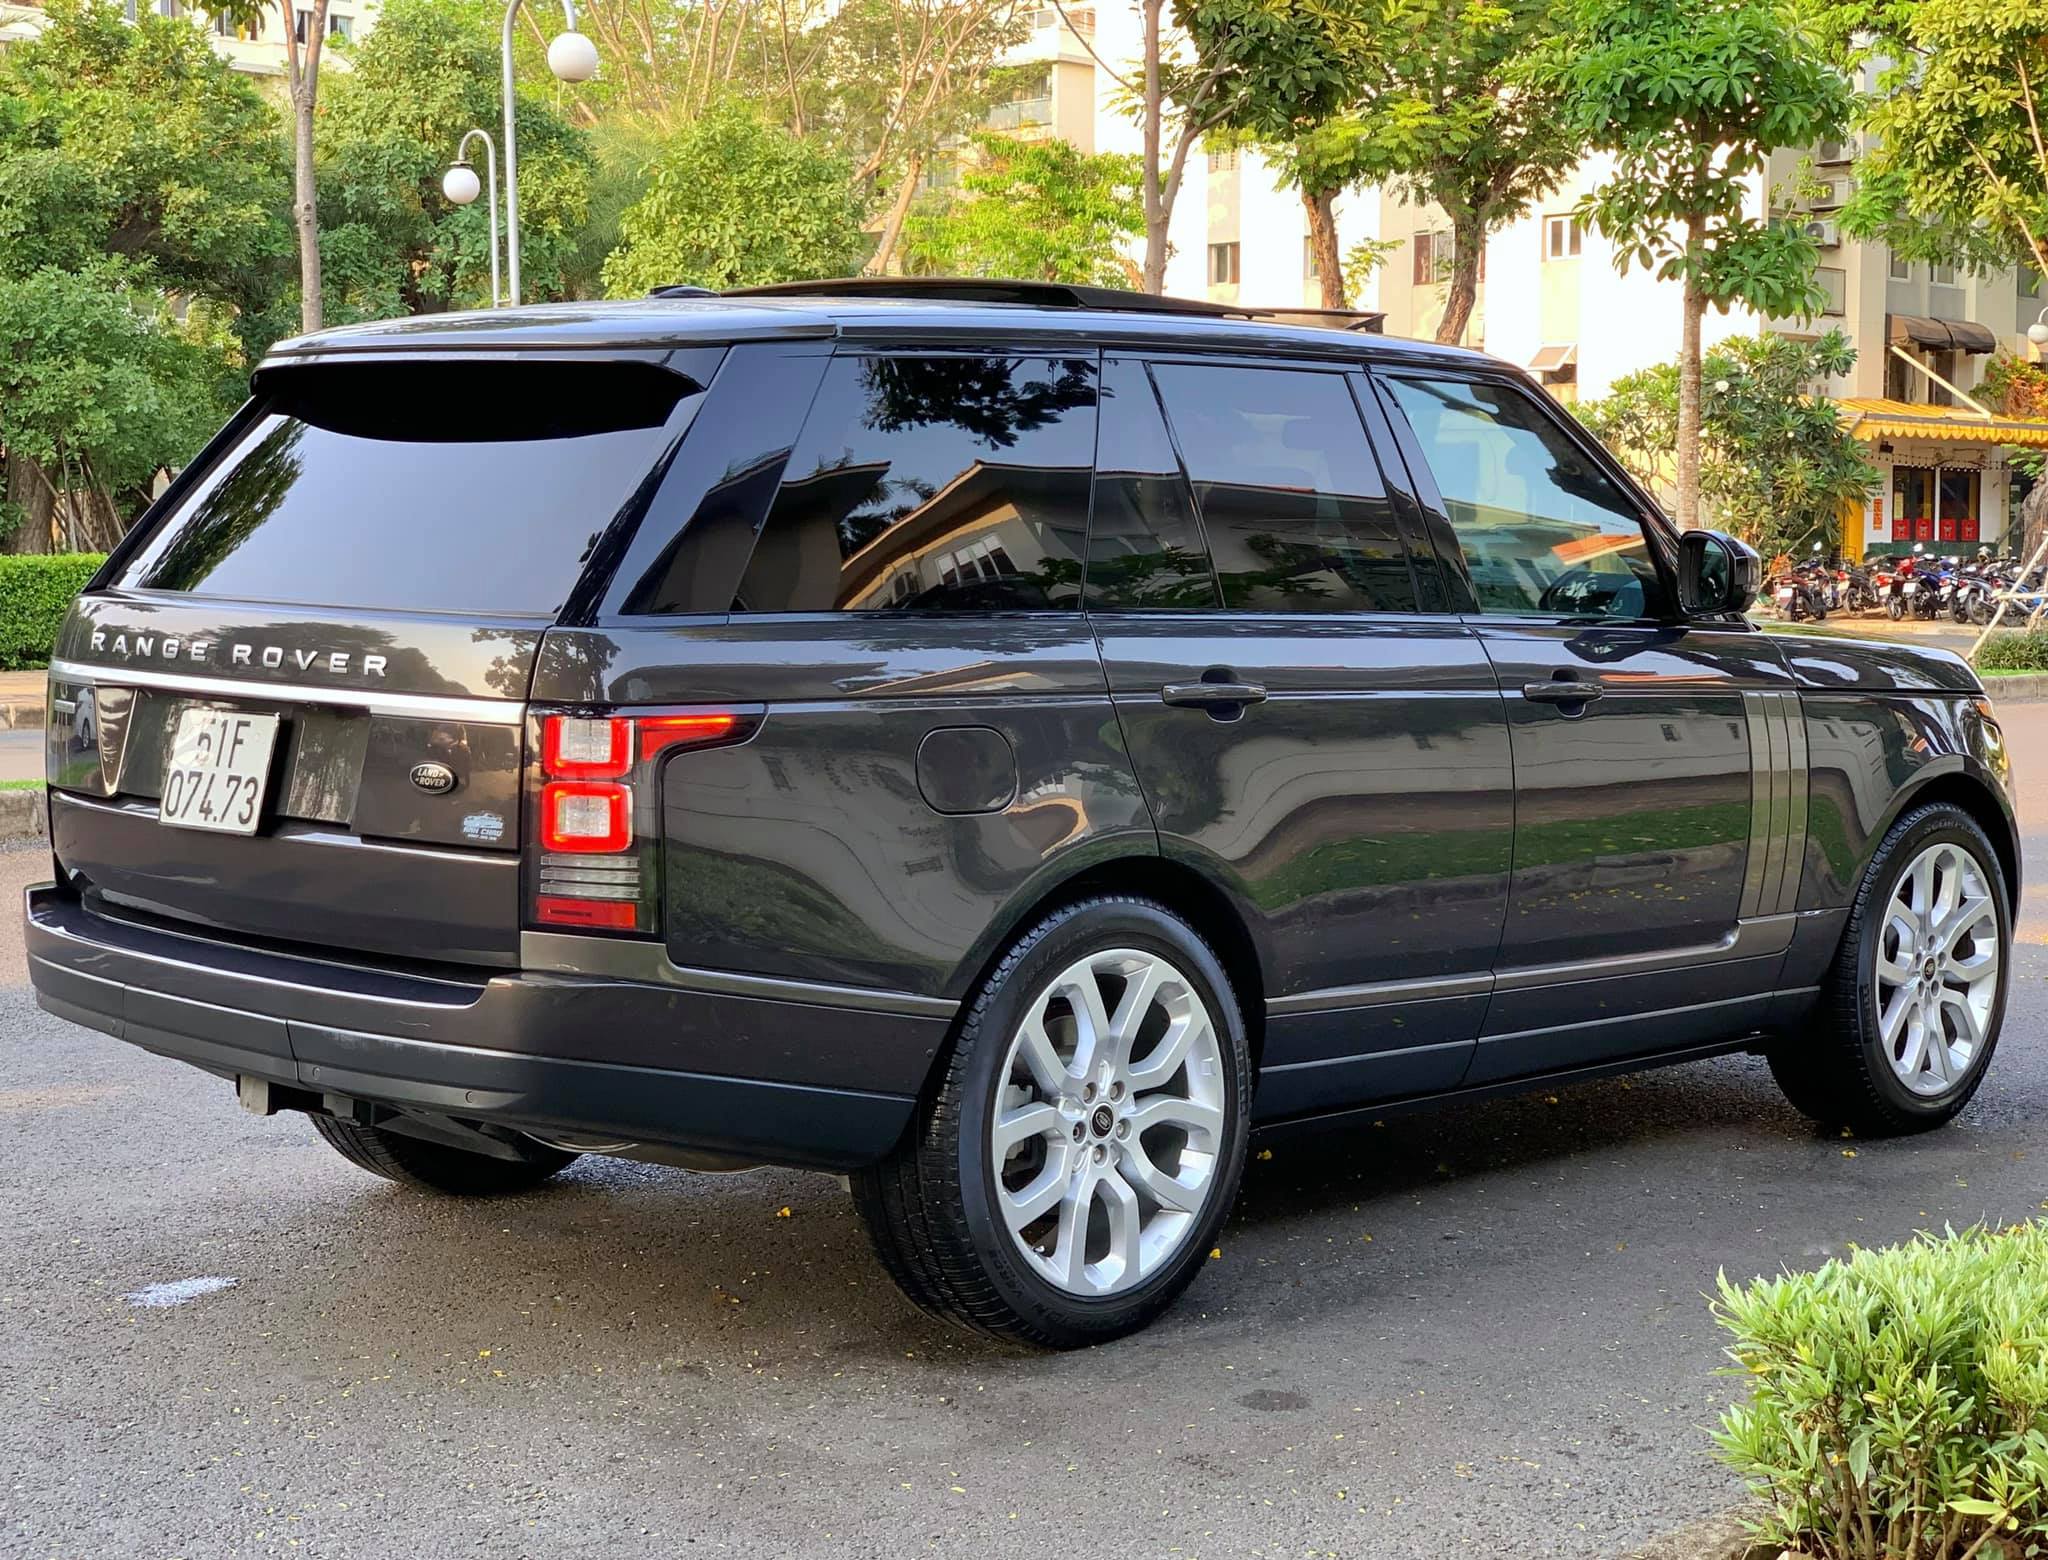 2015 Land Rover Range Rover  News reviews picture galleries and videos   The Car Guide